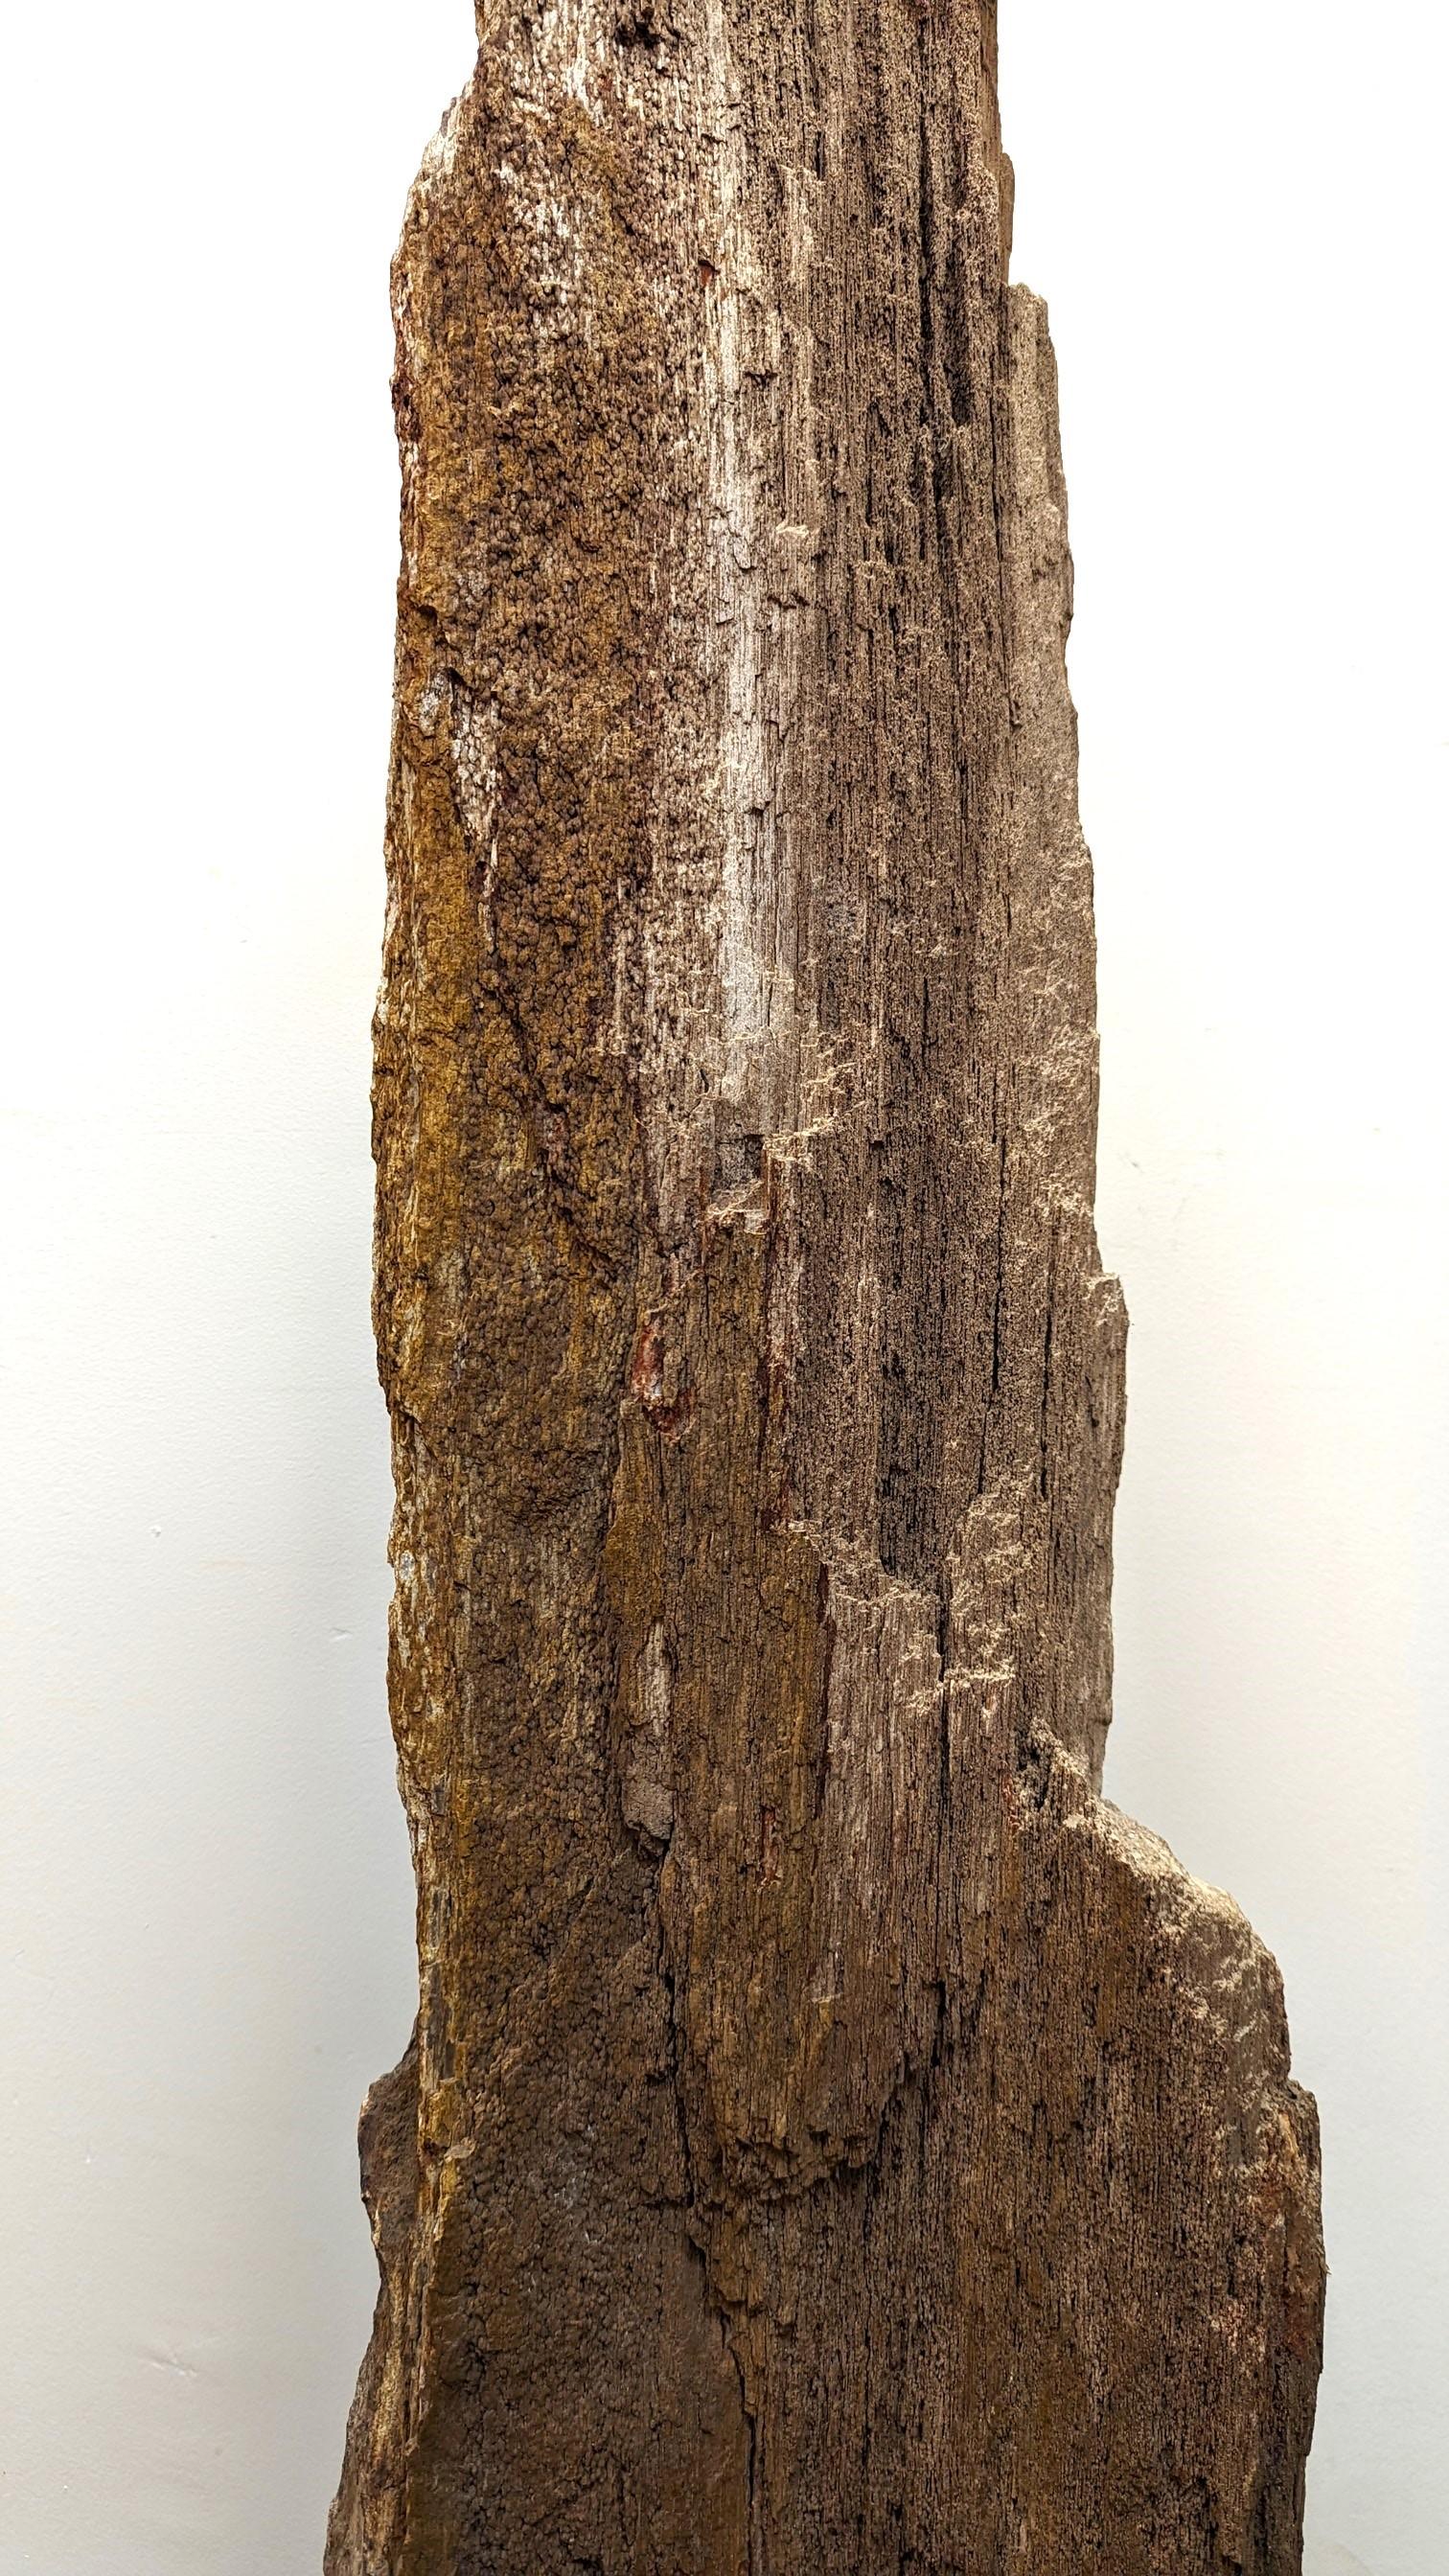 A natural piece of Petrified Wood set on a stand.  Completely organic natural raw fossil, cleaned for display.  Appearing as a towering mountain  with jutting peaks.  To the back side you can see remnants of the bark of the tree.  The natural